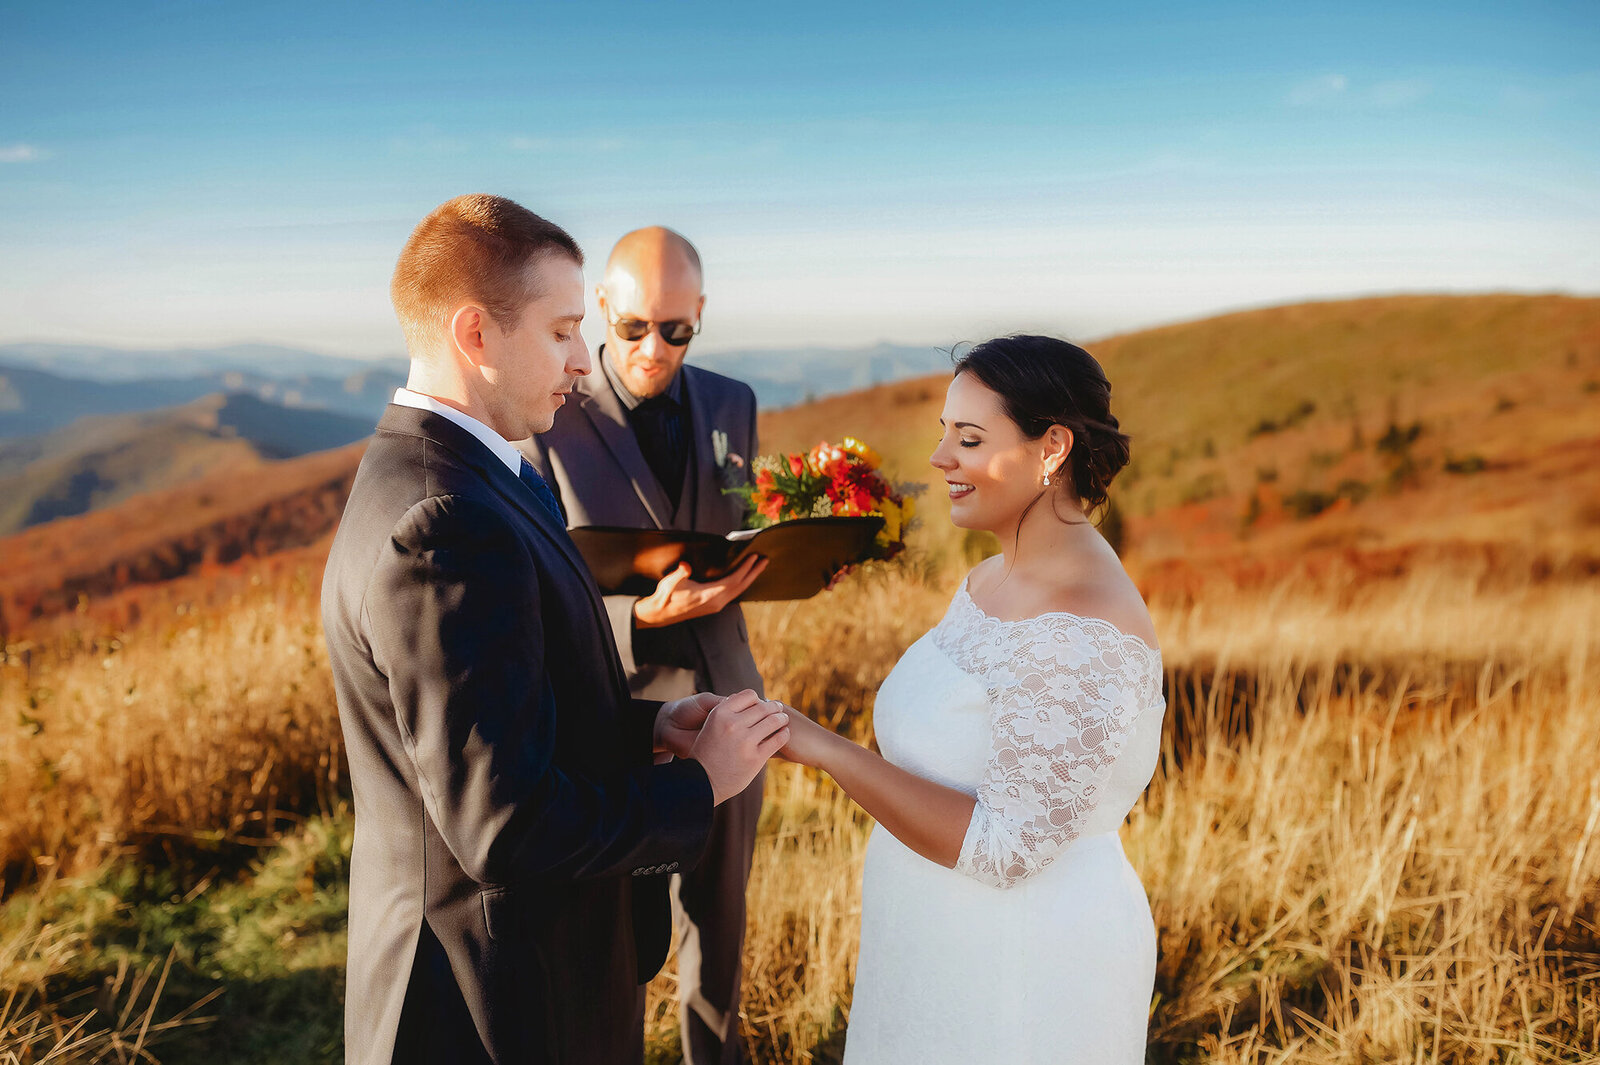 Elopement Ceremony at Black Balsam on the Blue Ridge Parkway outside of Asheville, NC.